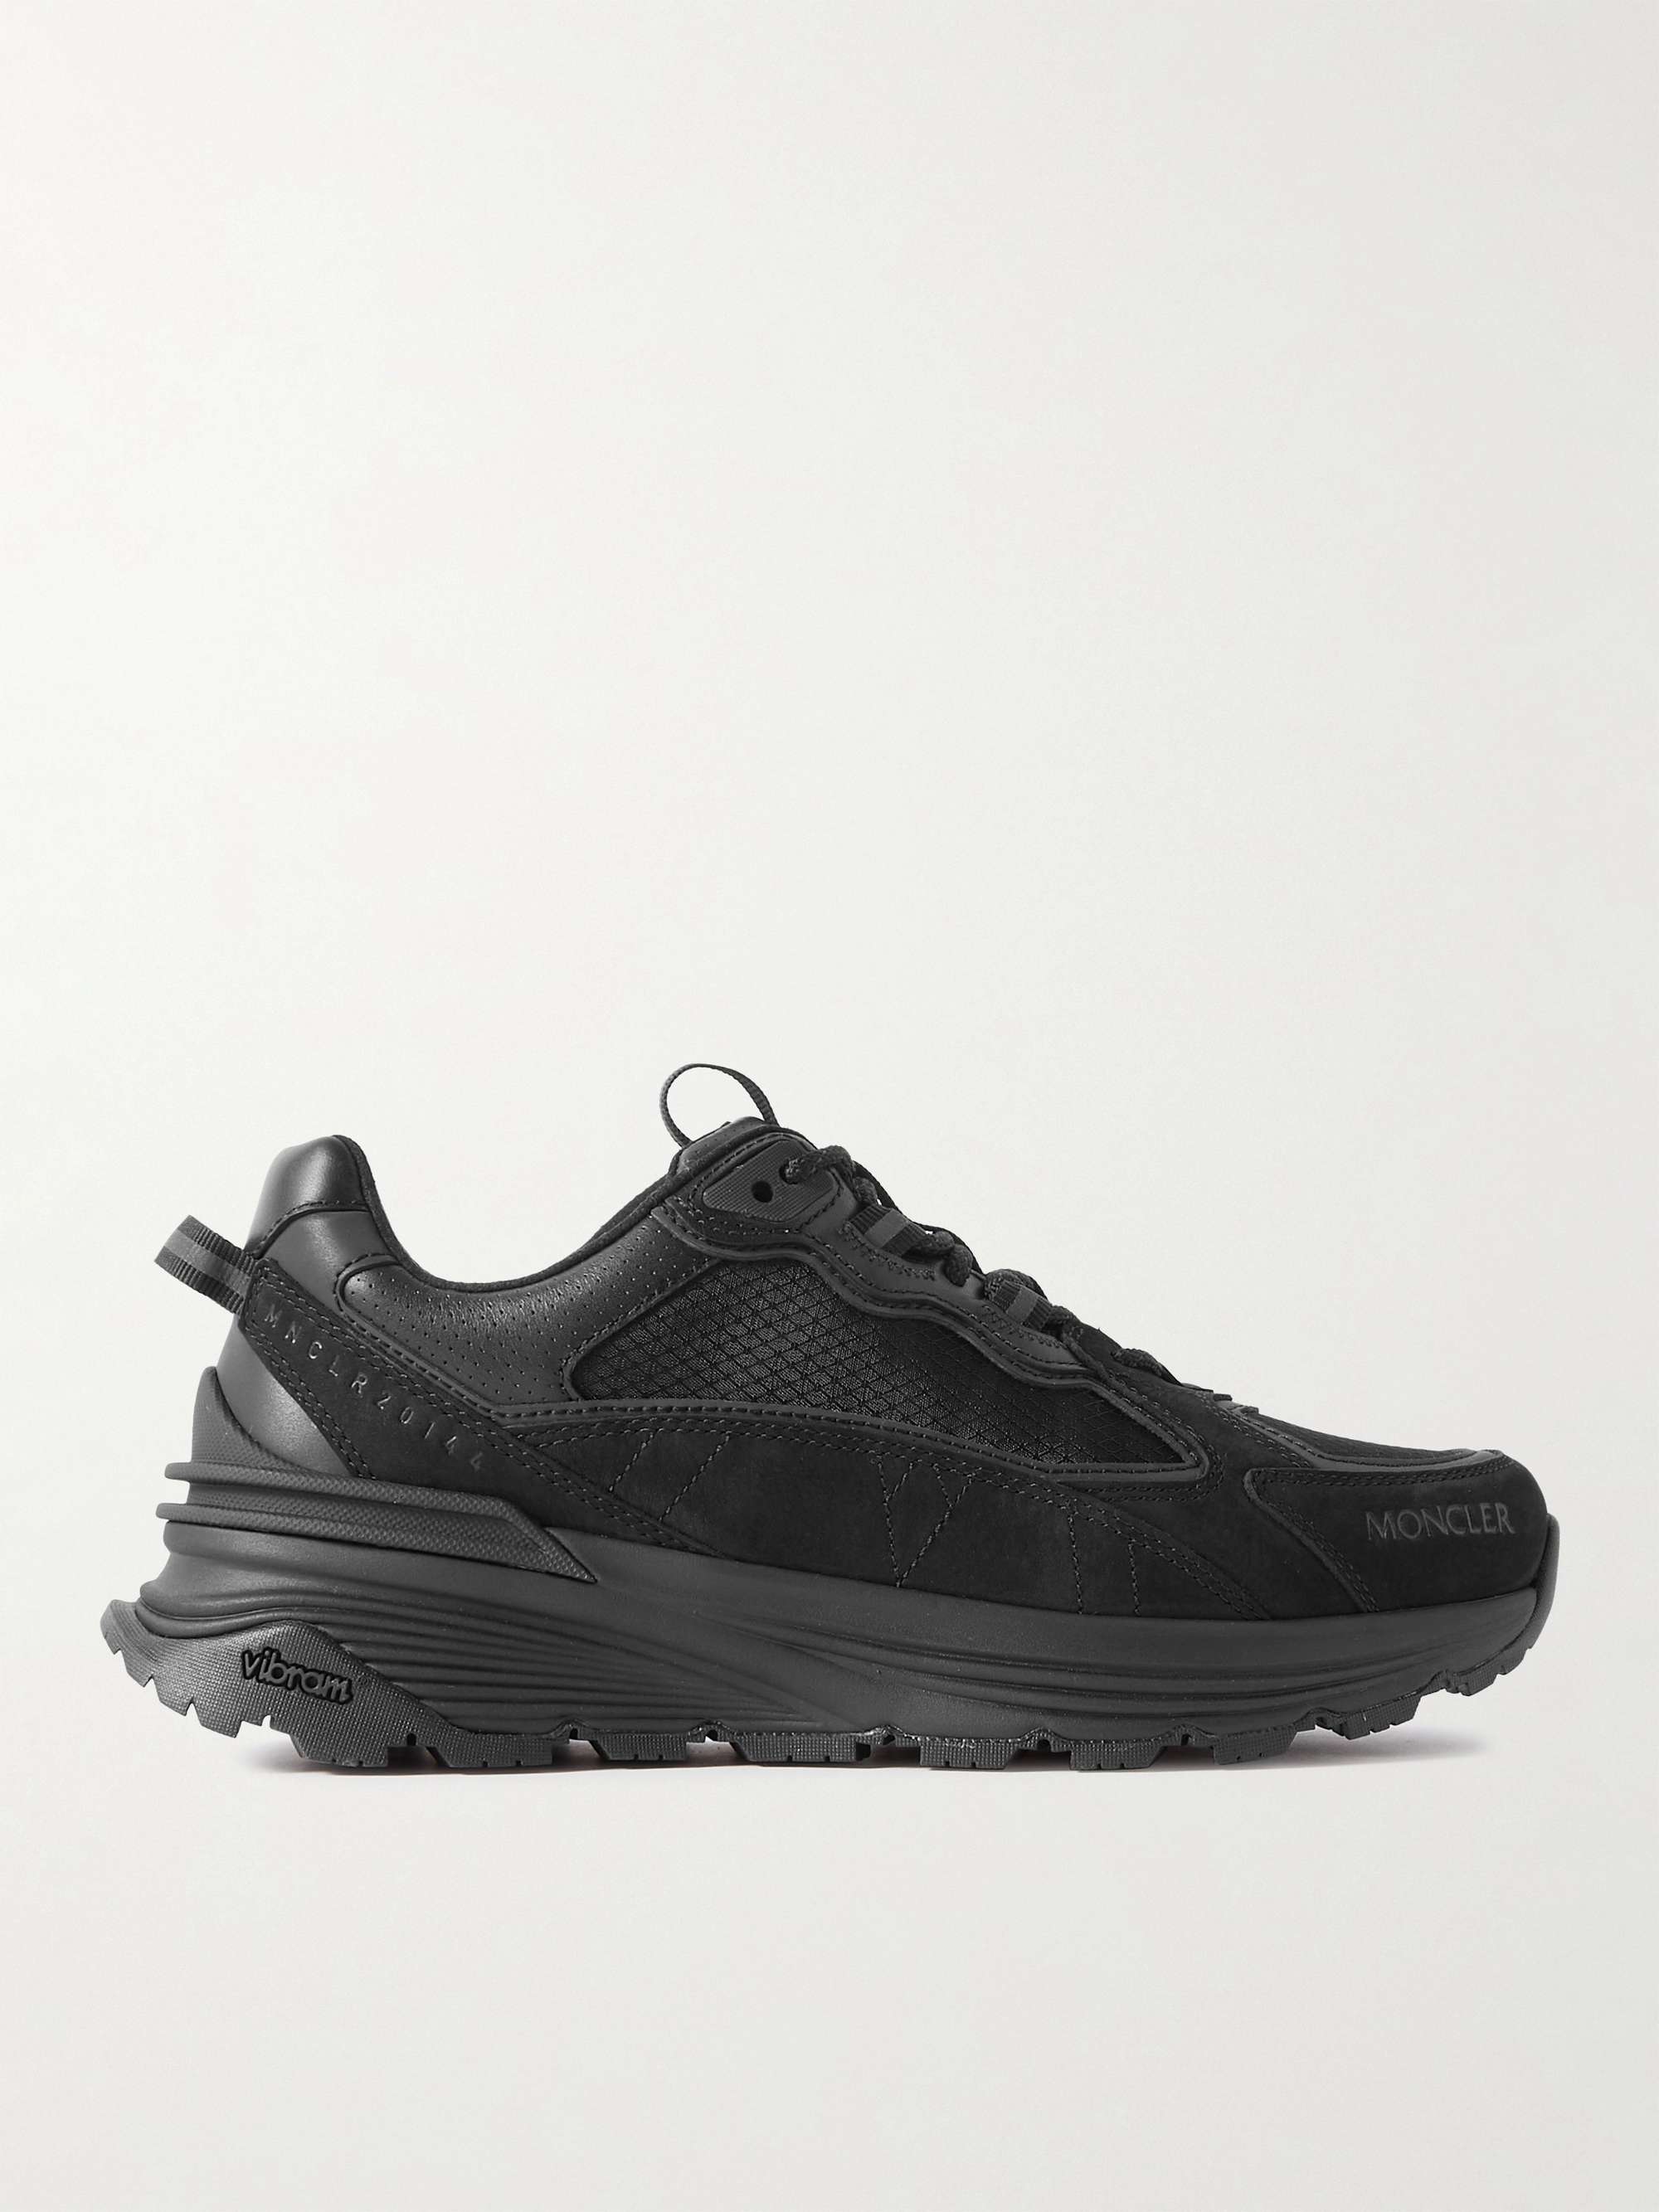 MONCLER Lite Runner Suede, Leather and Mesh Sneakers for Men | MR PORTER